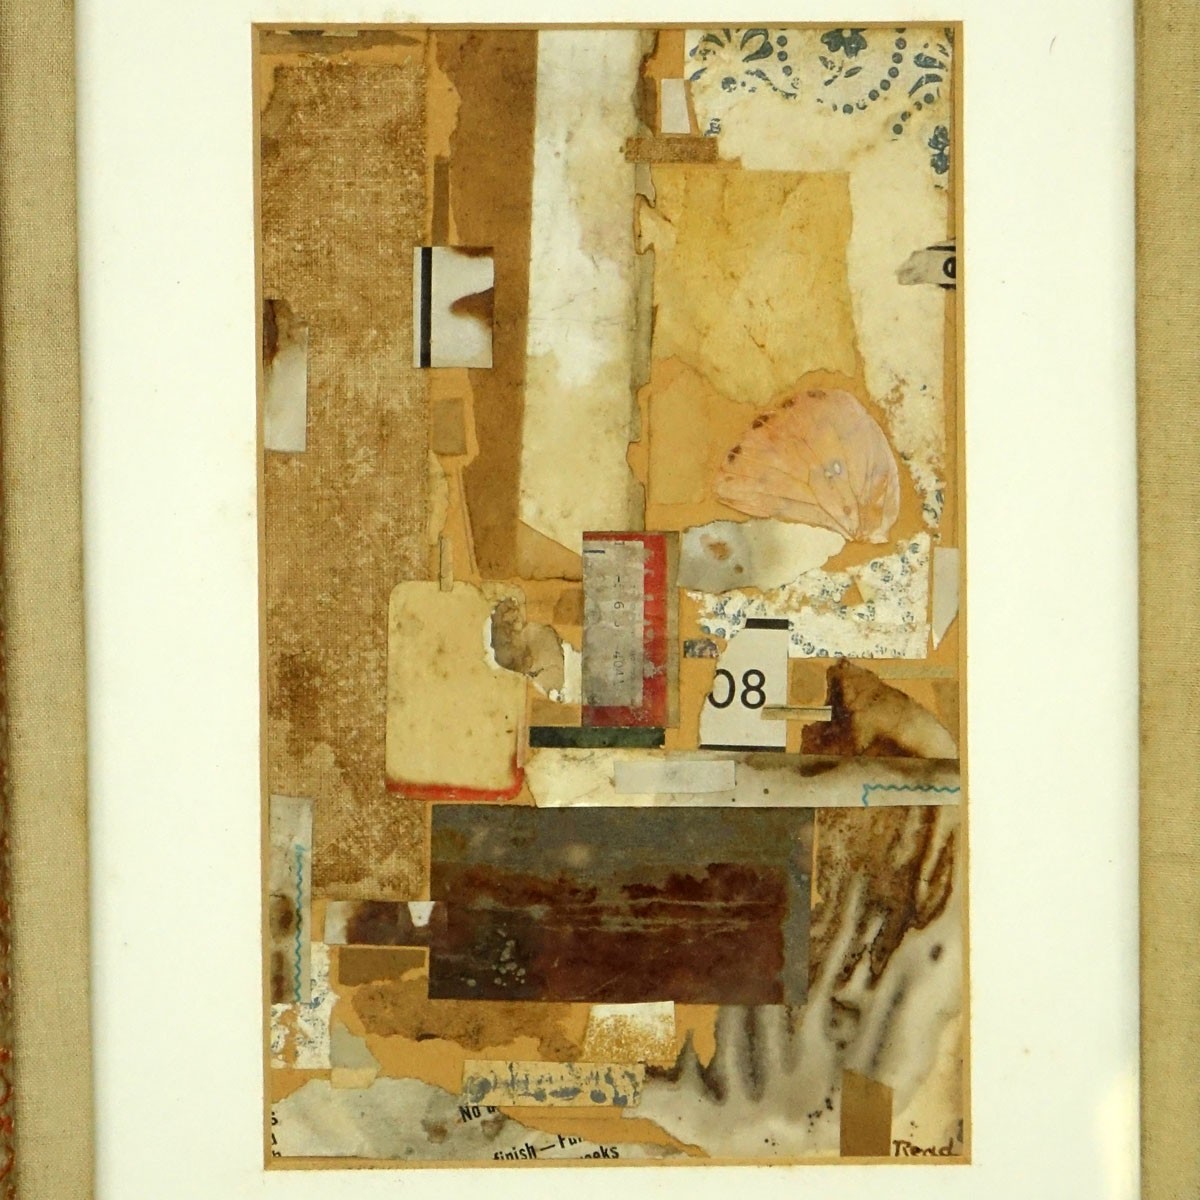 Philip Standish Read, American (1927 - 2000) Mixed Media Collage "Venetian Butterfly" Signed Lower Right, artist name and title attached en verso. Good condition.